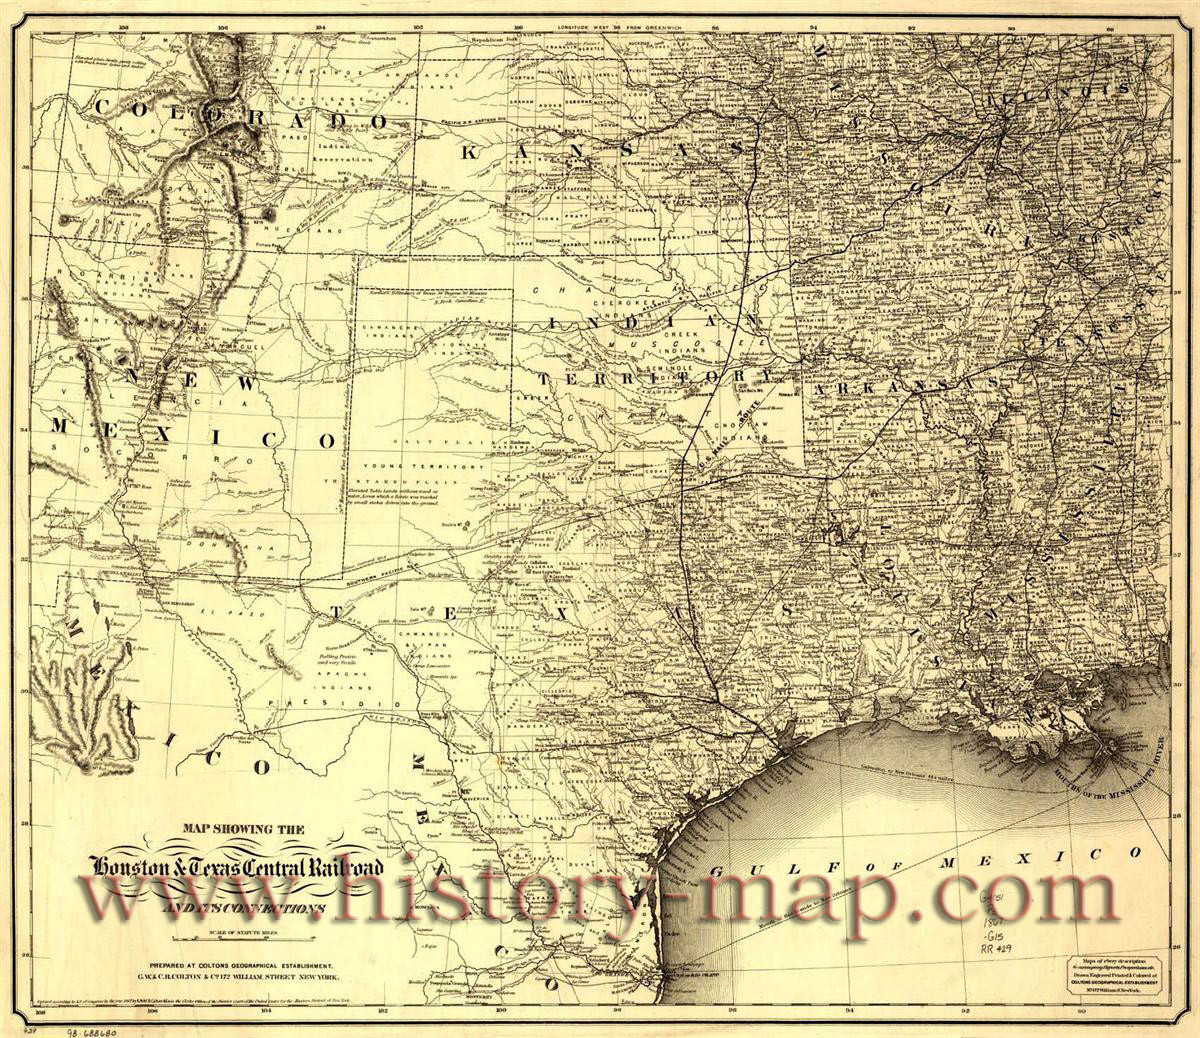 Houston and Texas Central Railroad Map